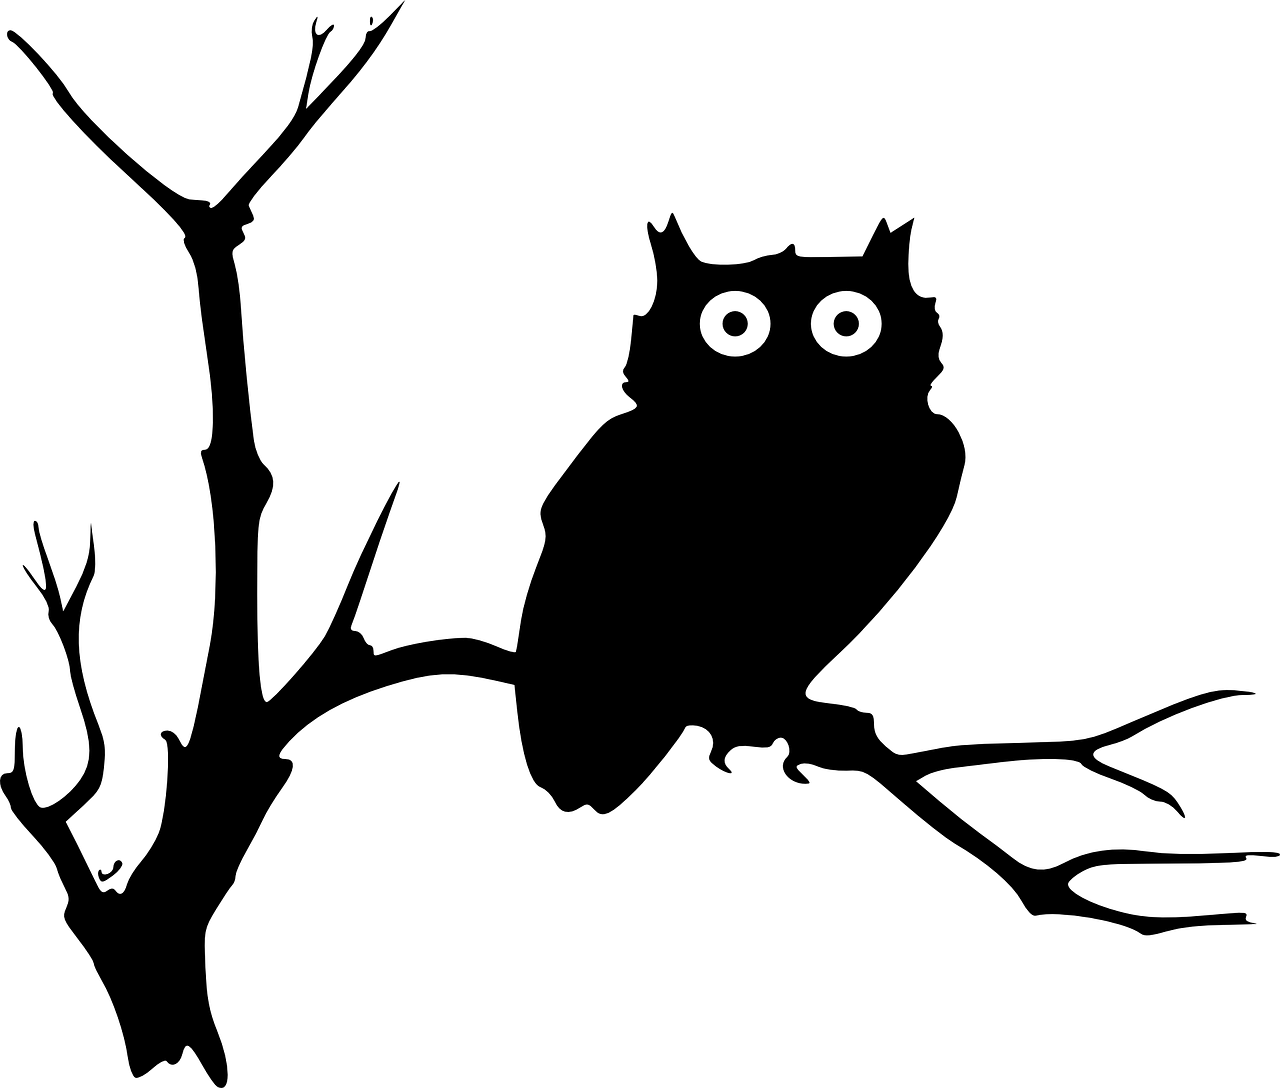 an image of two eyes in the dark, a minimalist painting, by Chris Friel, postminimalism, portrait of a cute monster, black backround. inkscape, white on black, r/aww